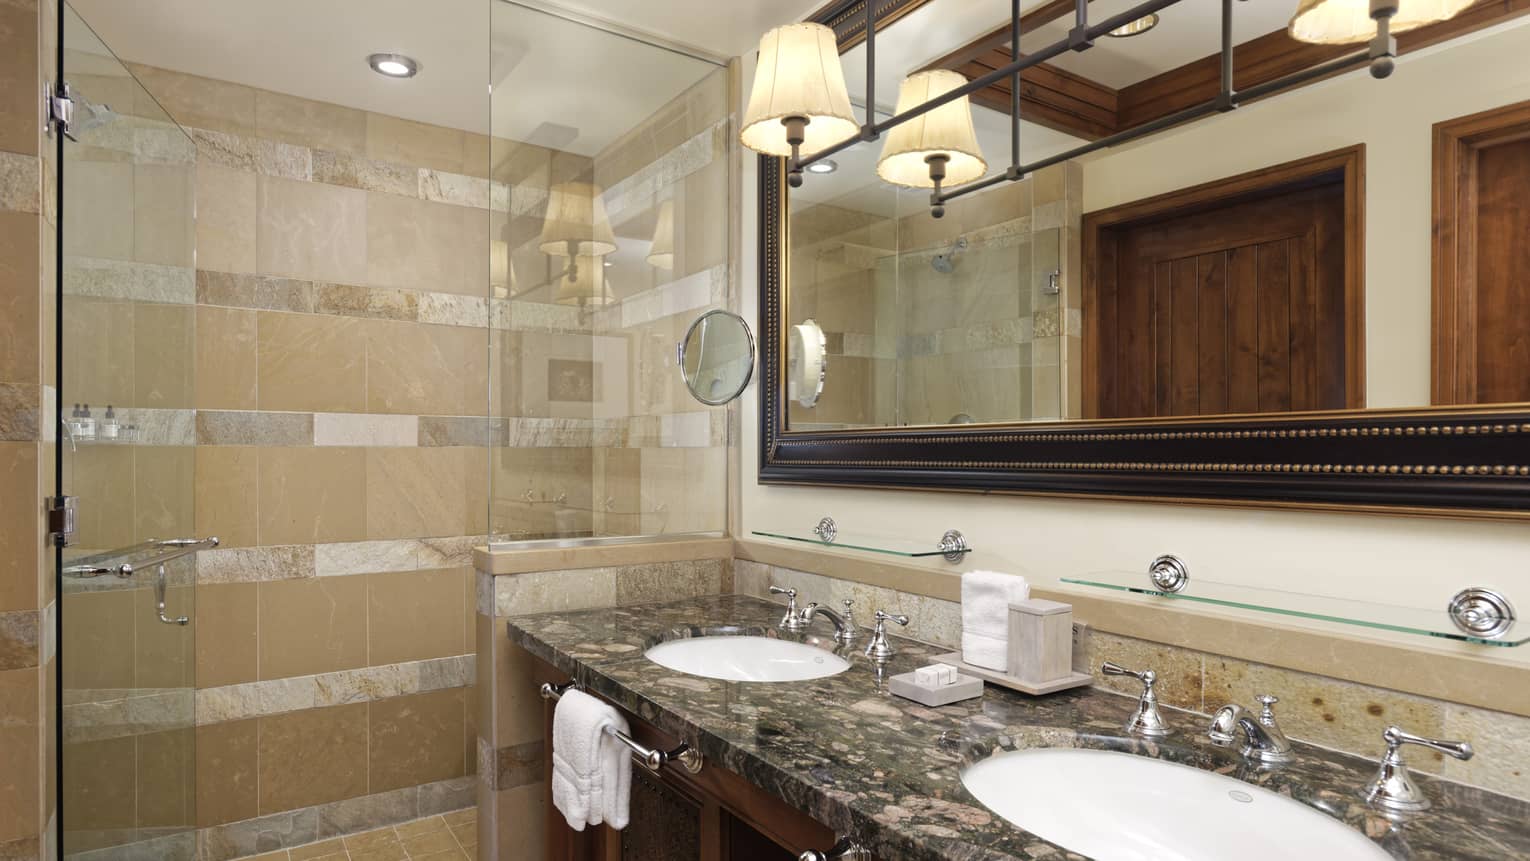 Bathroom with two sinks and walk-in glass shower